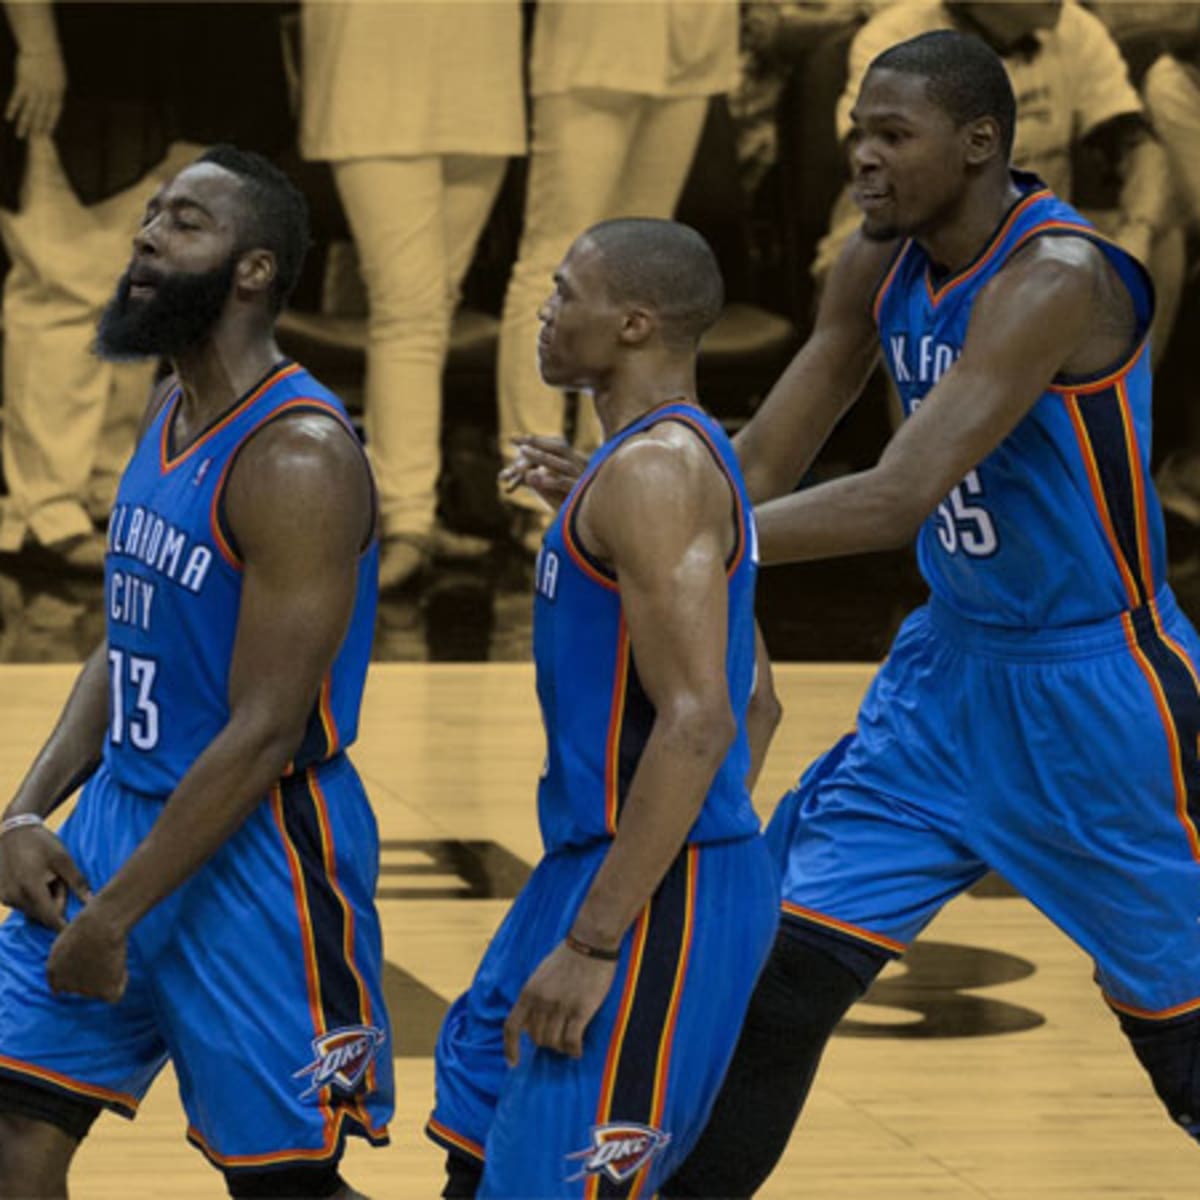 For Oklahoma City, Why Serge Ibaka Matters More Than James Harden